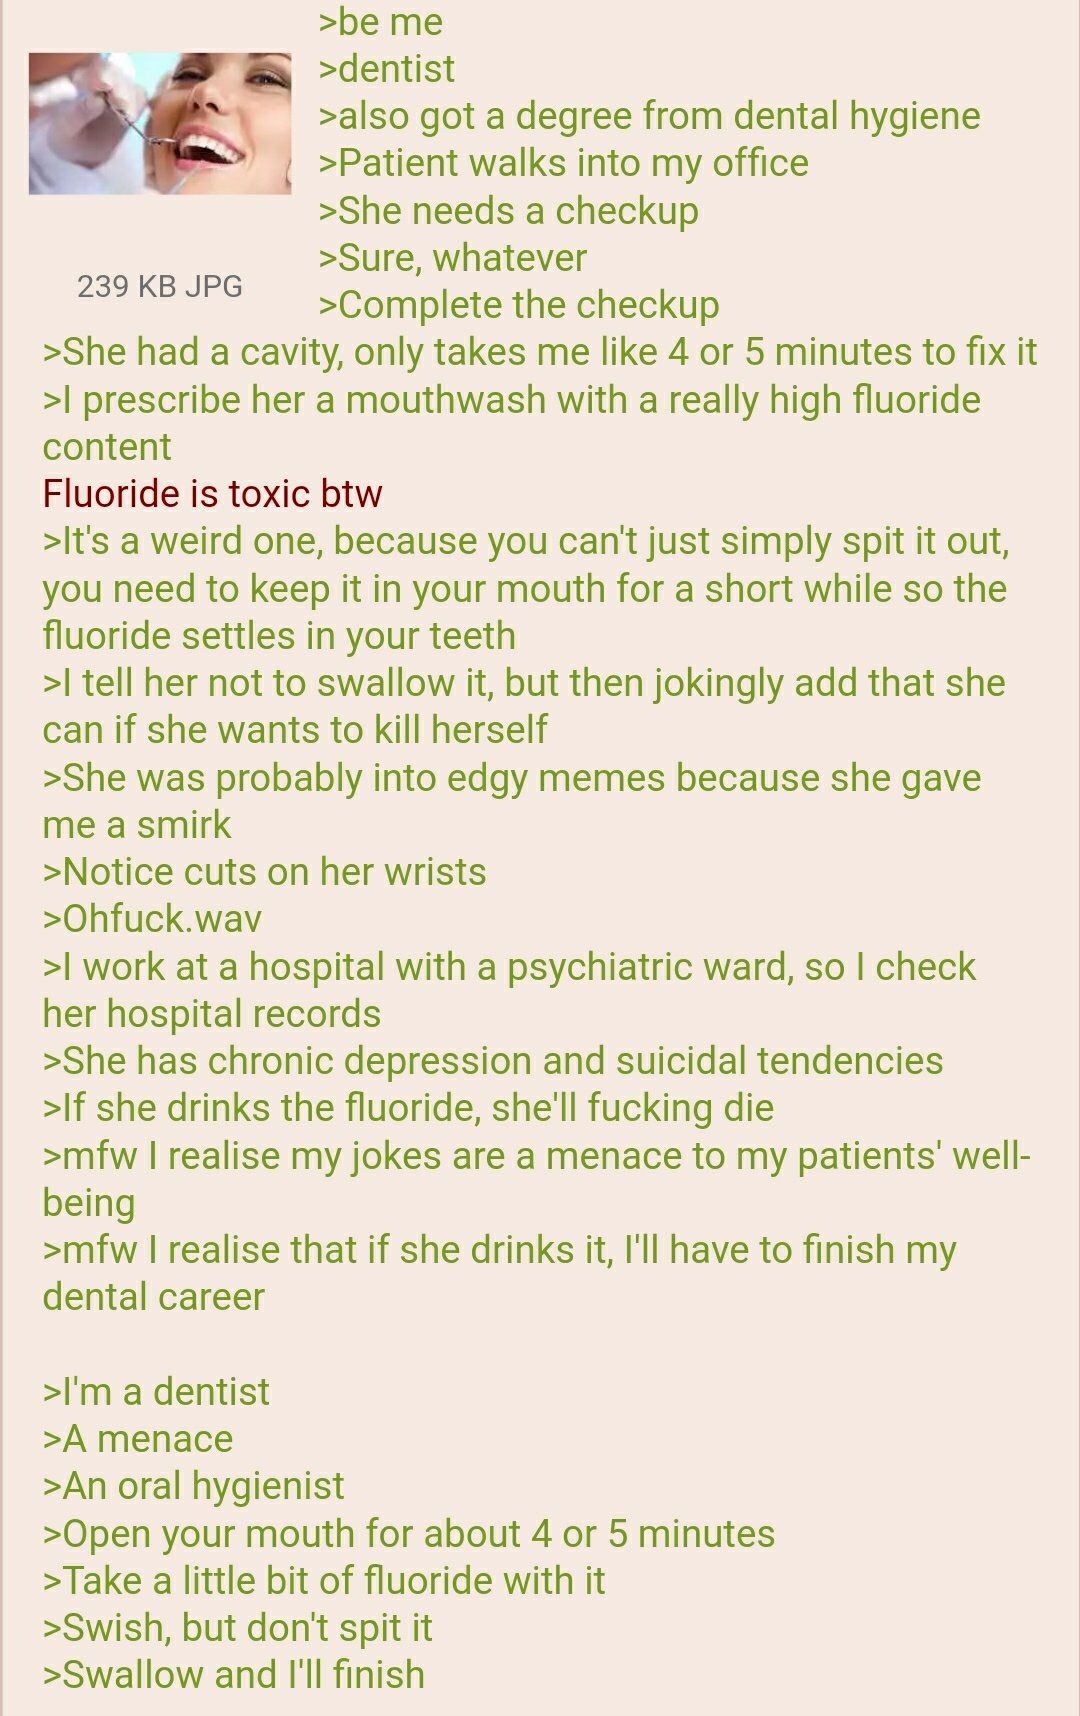 Anon is a dentist